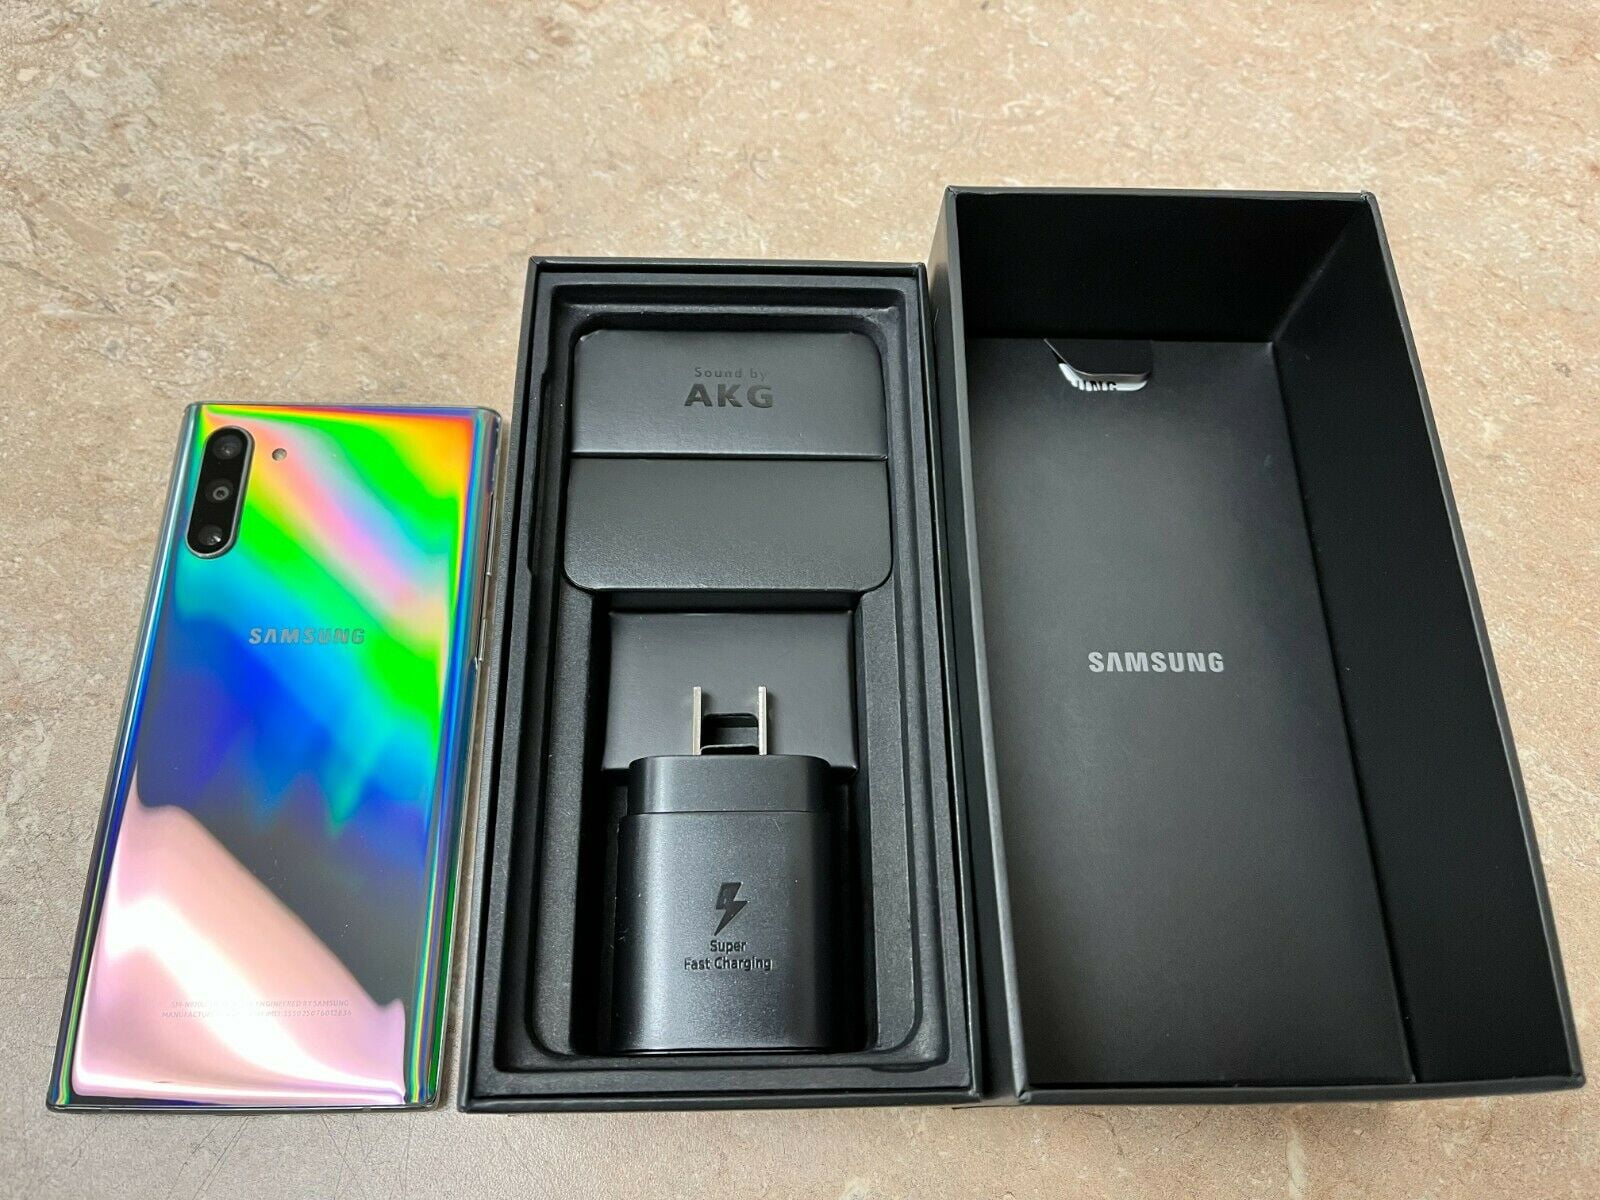  Samsung Galaxy Note 10, 256GB, Aura Black - for AT&T/T